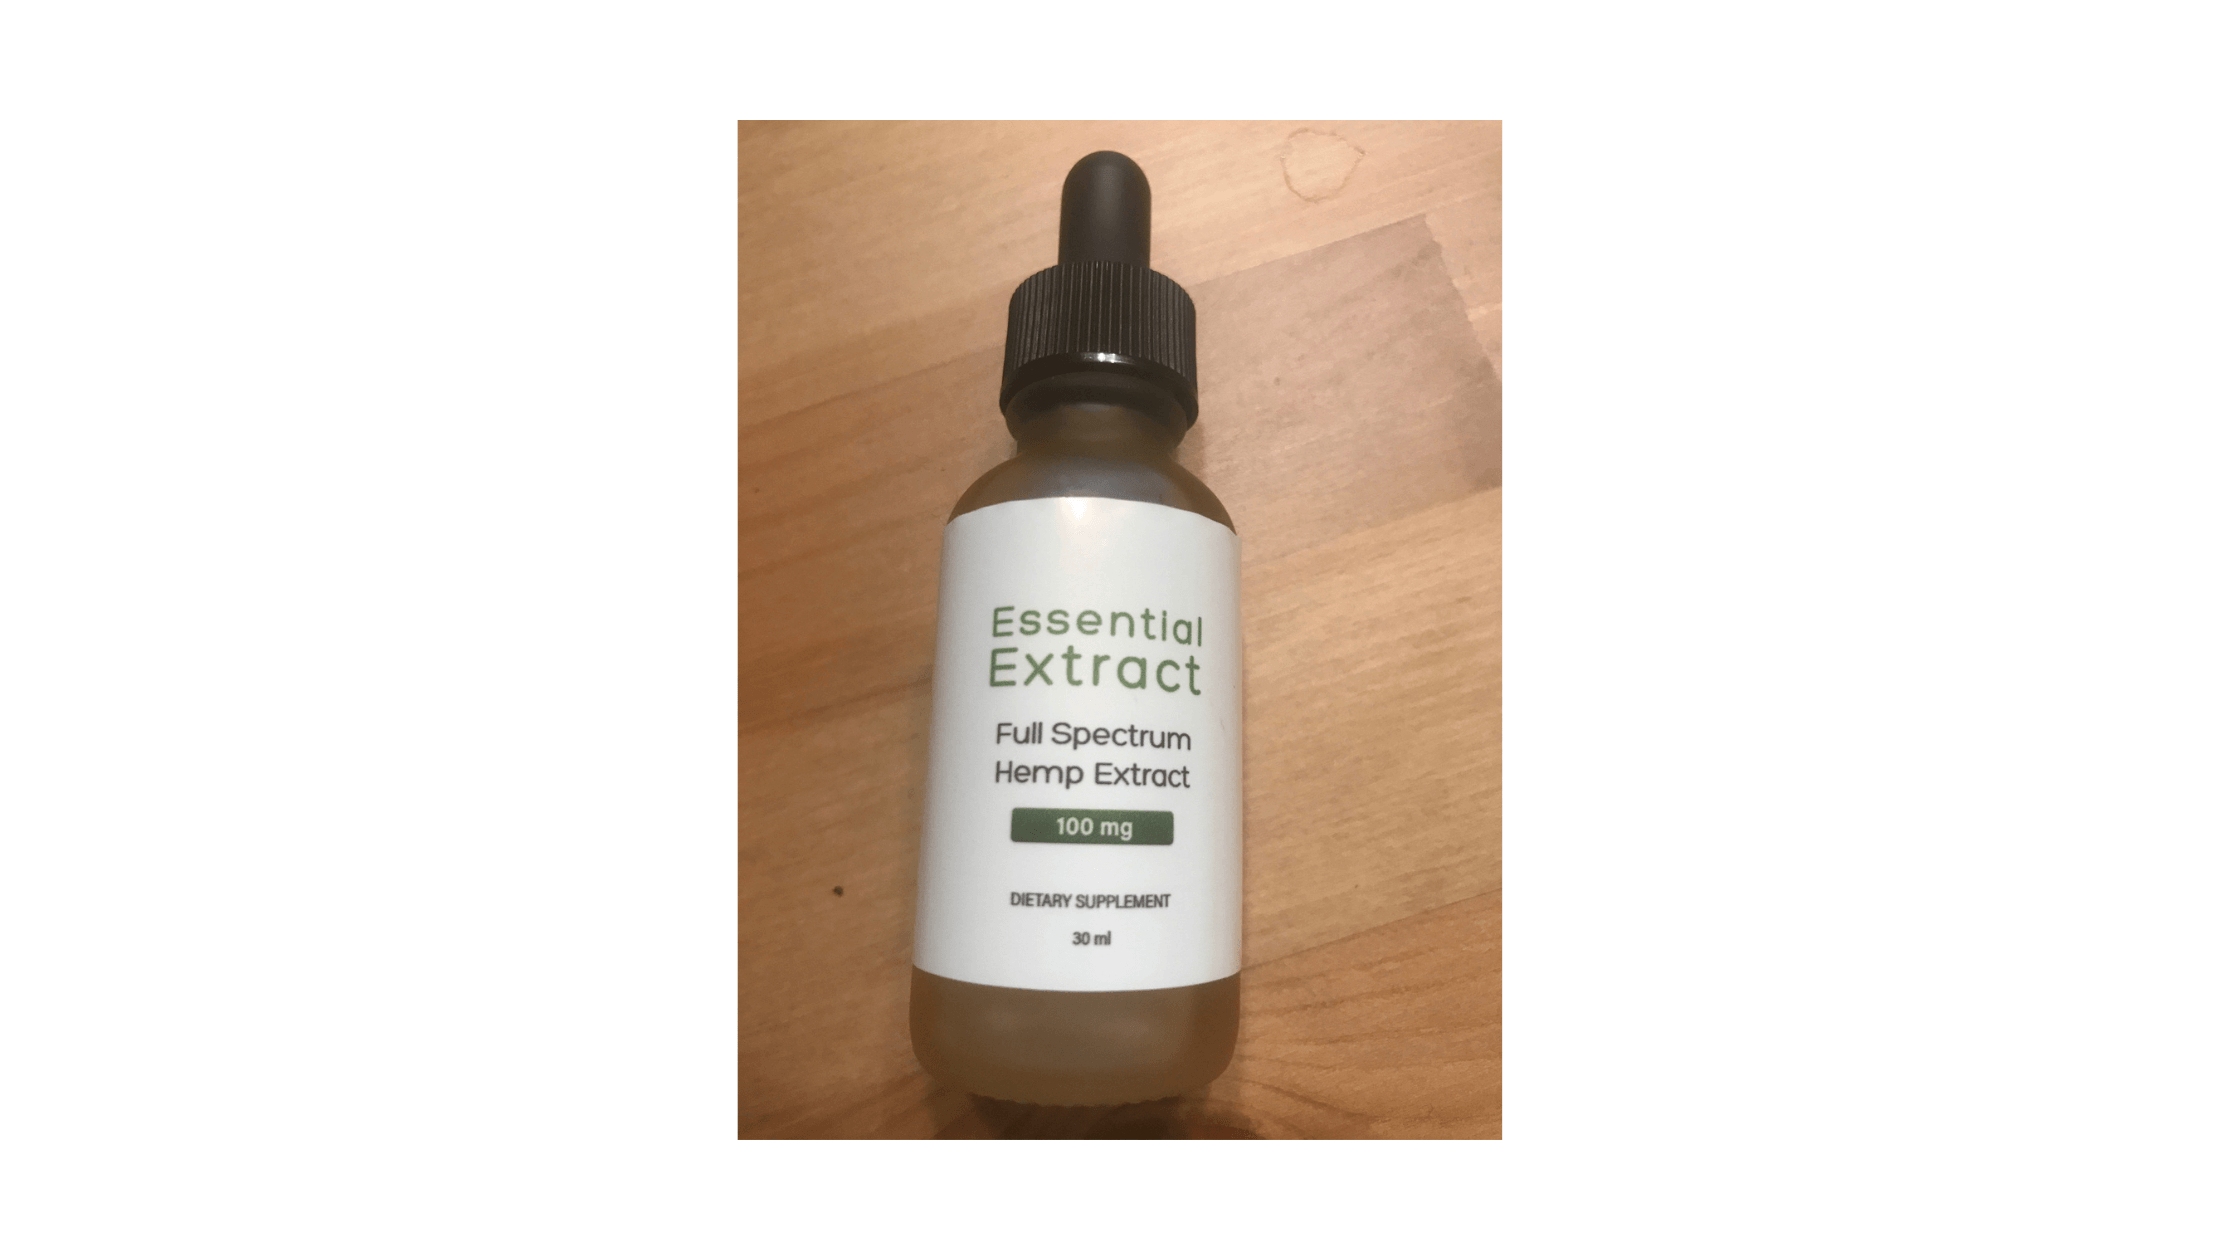  Essential CBD Extract Customer images